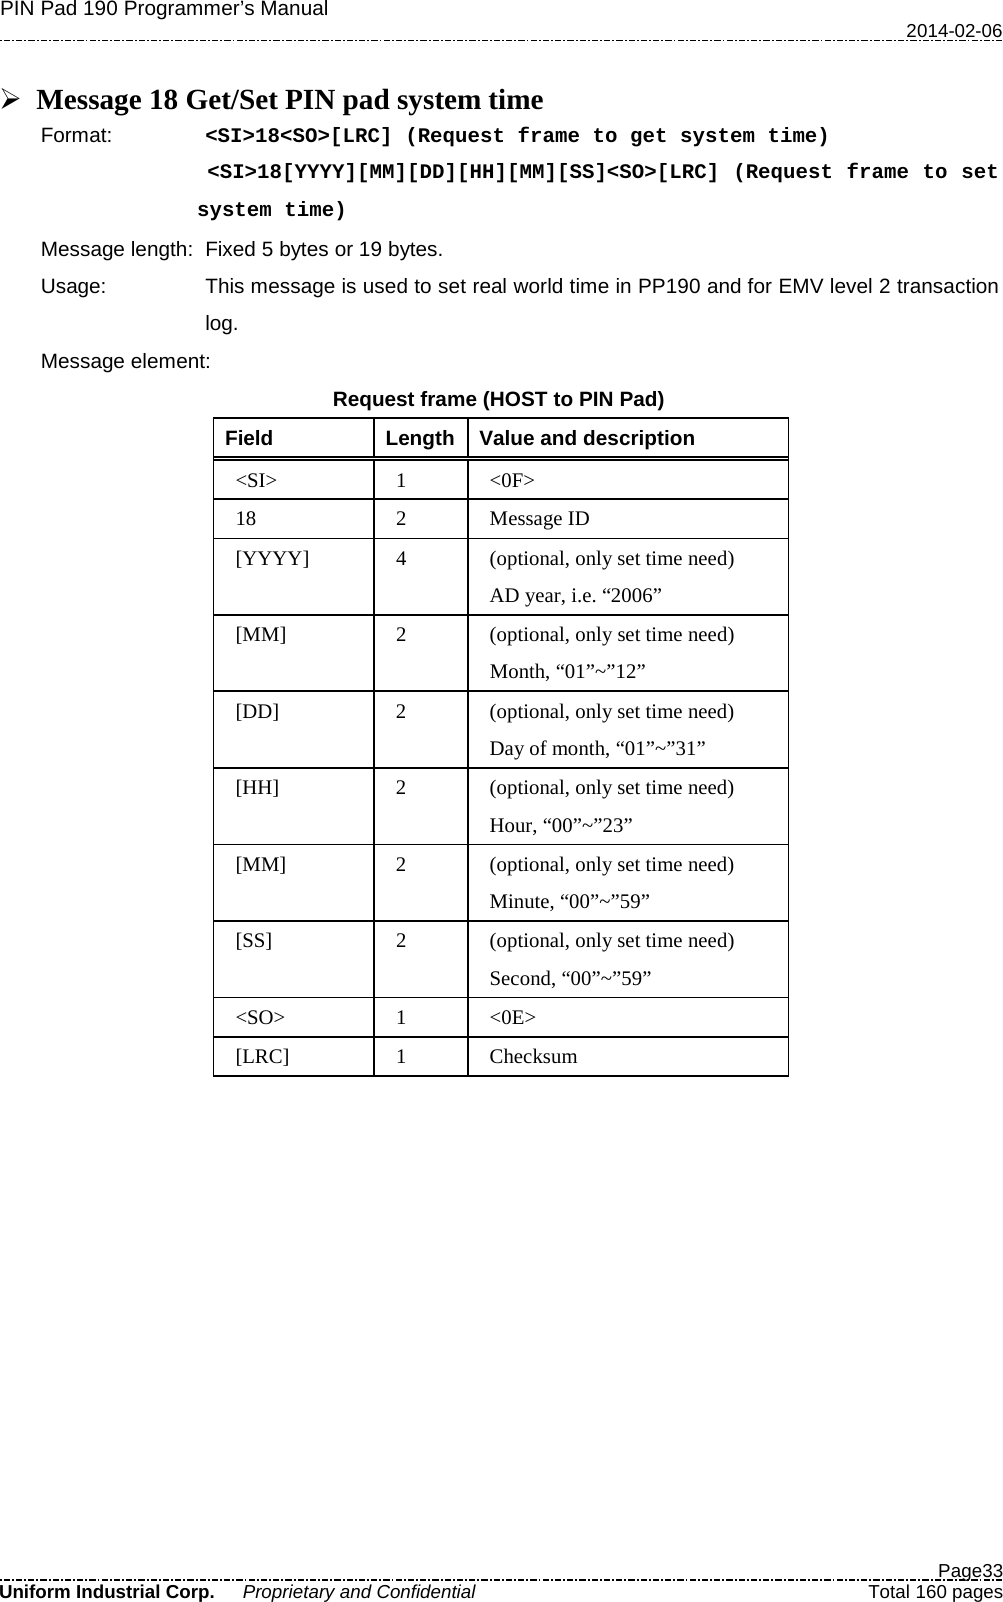 PIN Pad 190 Programmer’s Manual   2014-02-06  Page33 Uniform Industrial Corp. Proprietary and Confidential  Total 160 pages   Message 18 Get/Set PIN pad system time Format:   &lt;SI&gt;18&lt;SO&gt;[LRC] (Request frame to get system time) &lt;SI&gt;18[YYYY][MM][DD][HH][MM][SS]&lt;SO&gt;[LRC] (Request frame to set system time) Message length: Fixed 5 bytes or 19 bytes. Usage: This message is used to set real world time in PP190 and for EMV level 2 transaction log.   Message element: Request frame (HOST to PIN Pad) Field  Length  Value and description &lt;SI&gt;  1  &lt;0F&gt; 18  2  Message ID [YYYY]  4  (optional, only set time need) AD year, i.e. “2006” [MM]  2  (optional, only set time need) Month, “01”~”12” [DD]  2  (optional, only set time need) Day of month, “01”~”31” [HH]  2  (optional, only set time need) Hour, “00”~”23” [MM]  2  (optional, only set time need) Minute, “00”~”59” [SS]  2  (optional, only set time need) Second, “00”~”59” &lt;SO&gt;  1  &lt;0E&gt; [LRC]  1  Checksum             